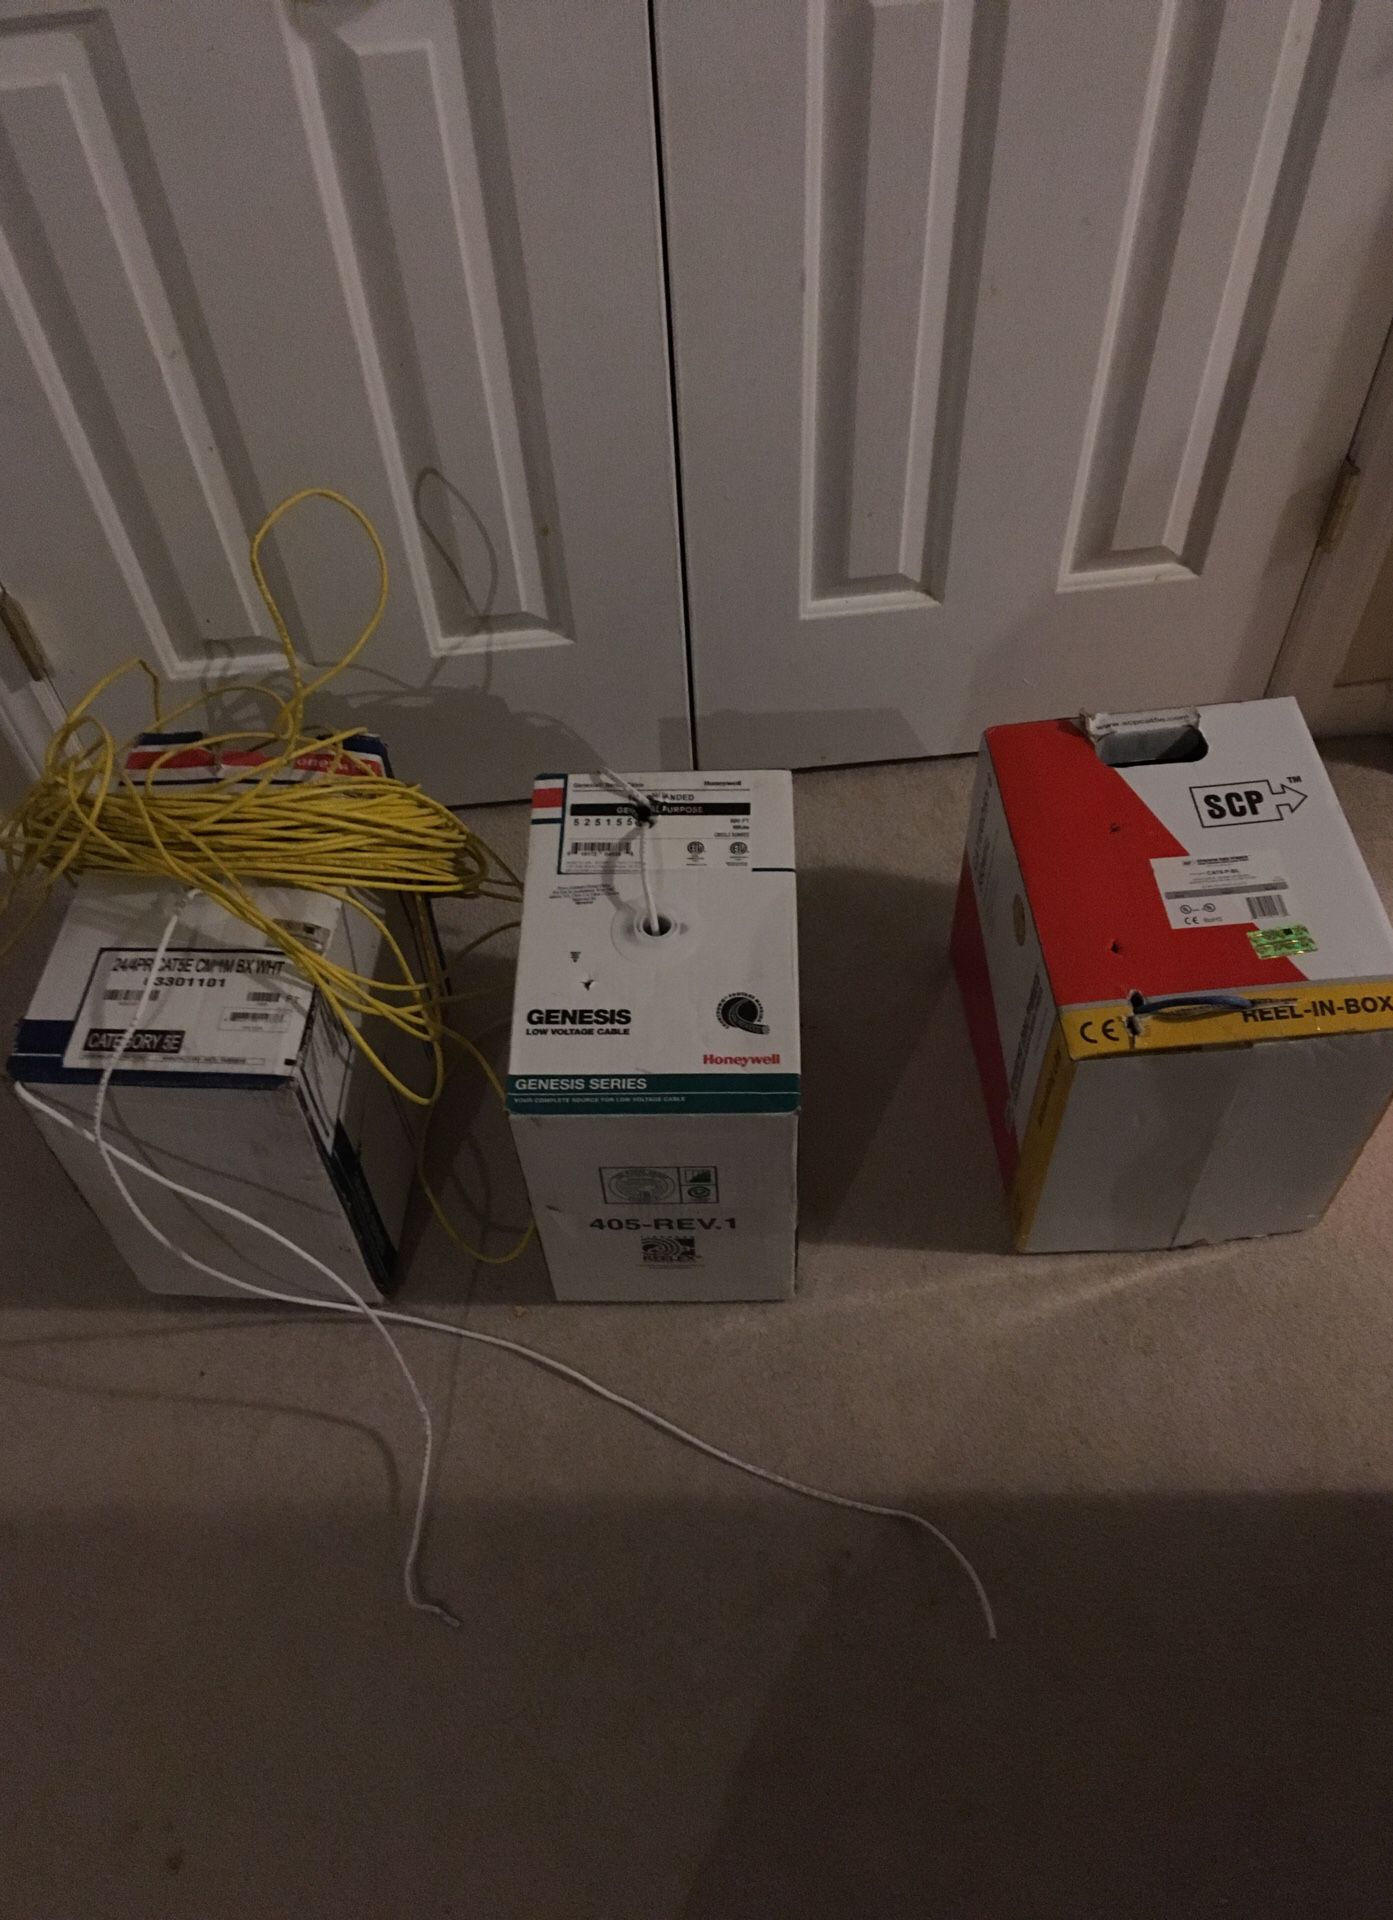 Network wire Cat 5e, Cat 6, And 16/4 stereo wire